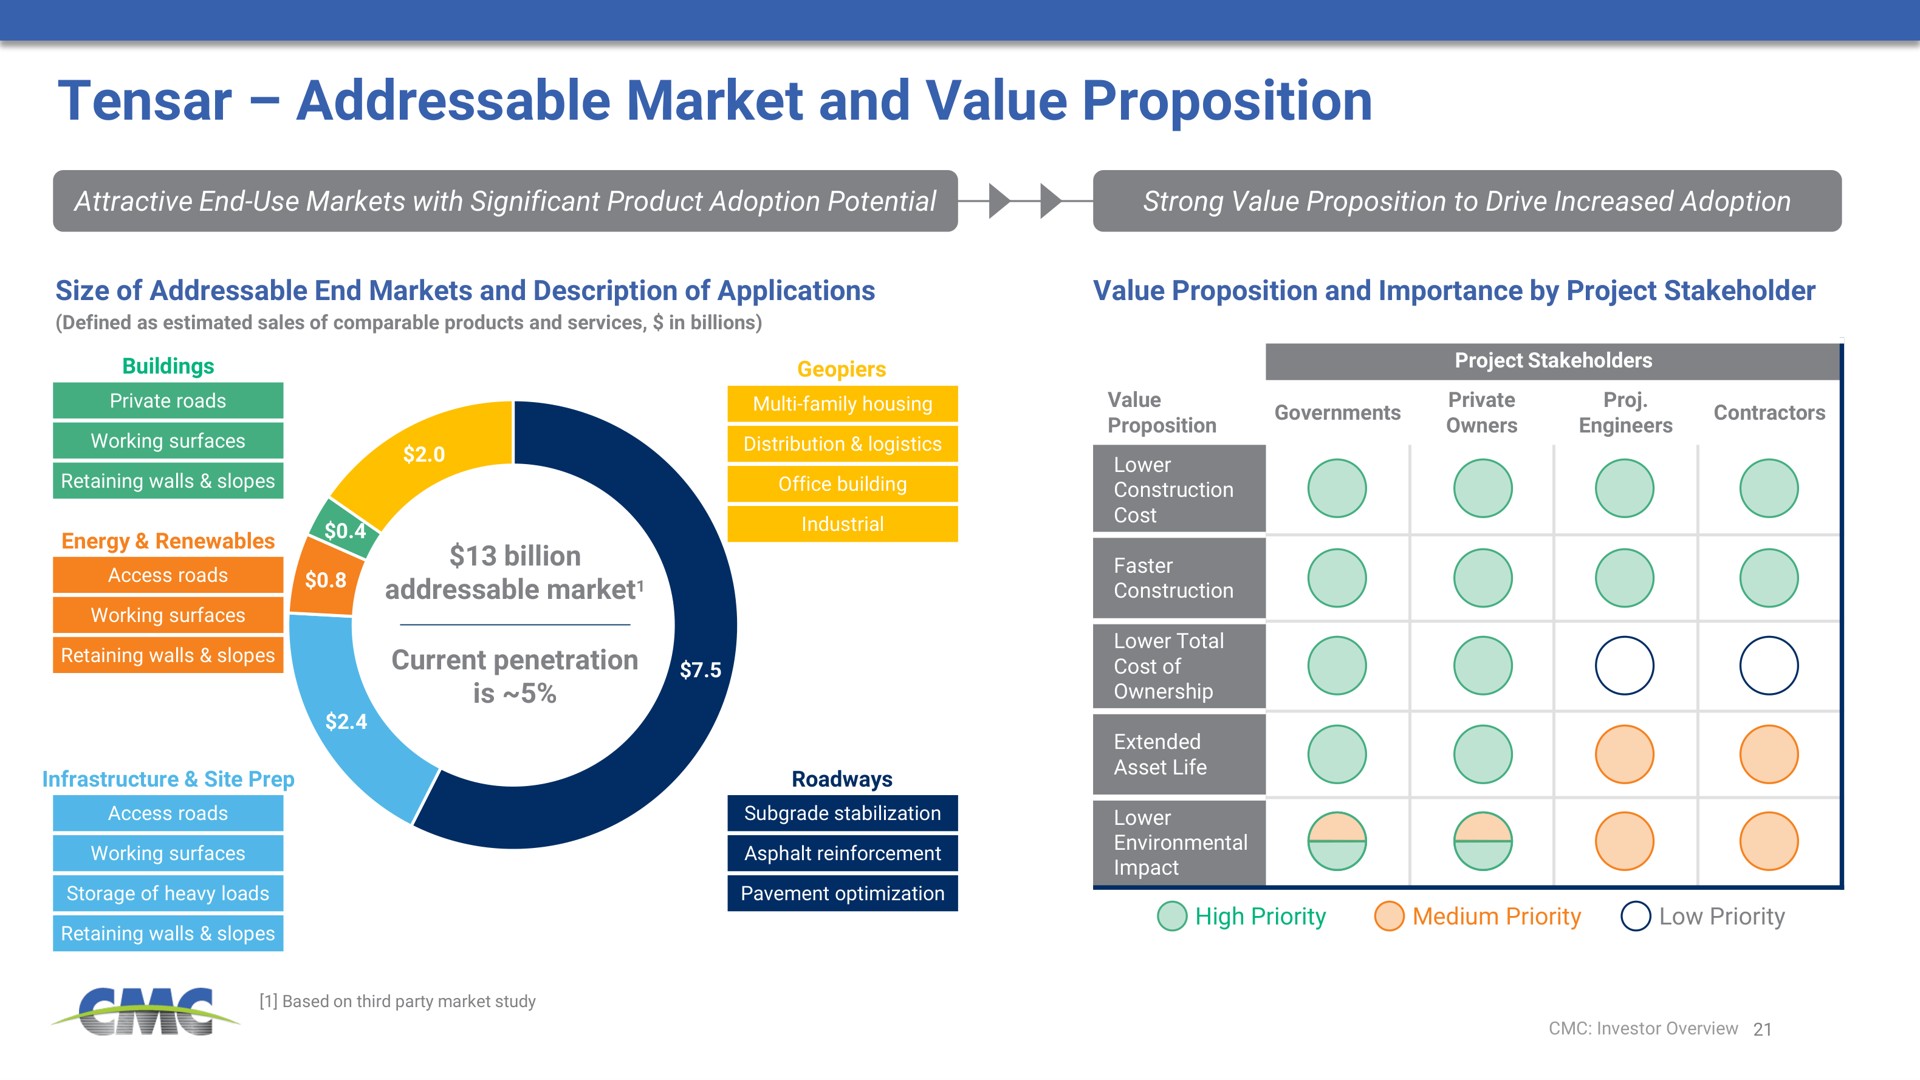 market and value proposition | Commercial Metals Company